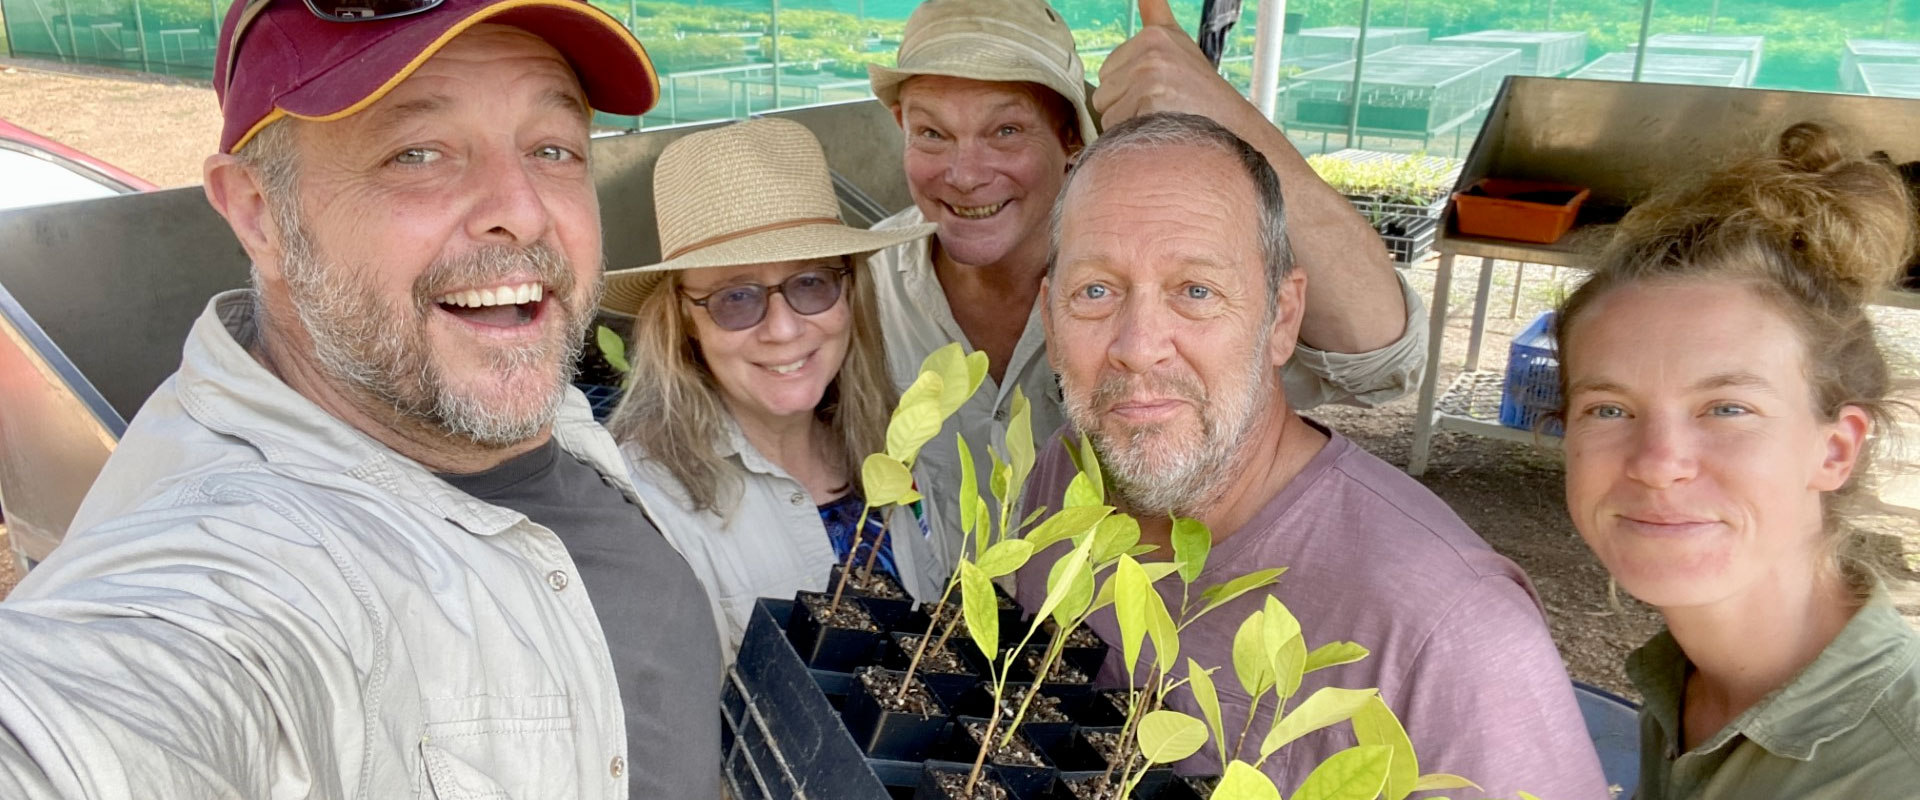 Dave Pinson from Daintree Life with the Rainforest Rescue team at the Native Nursery in Cow Bay